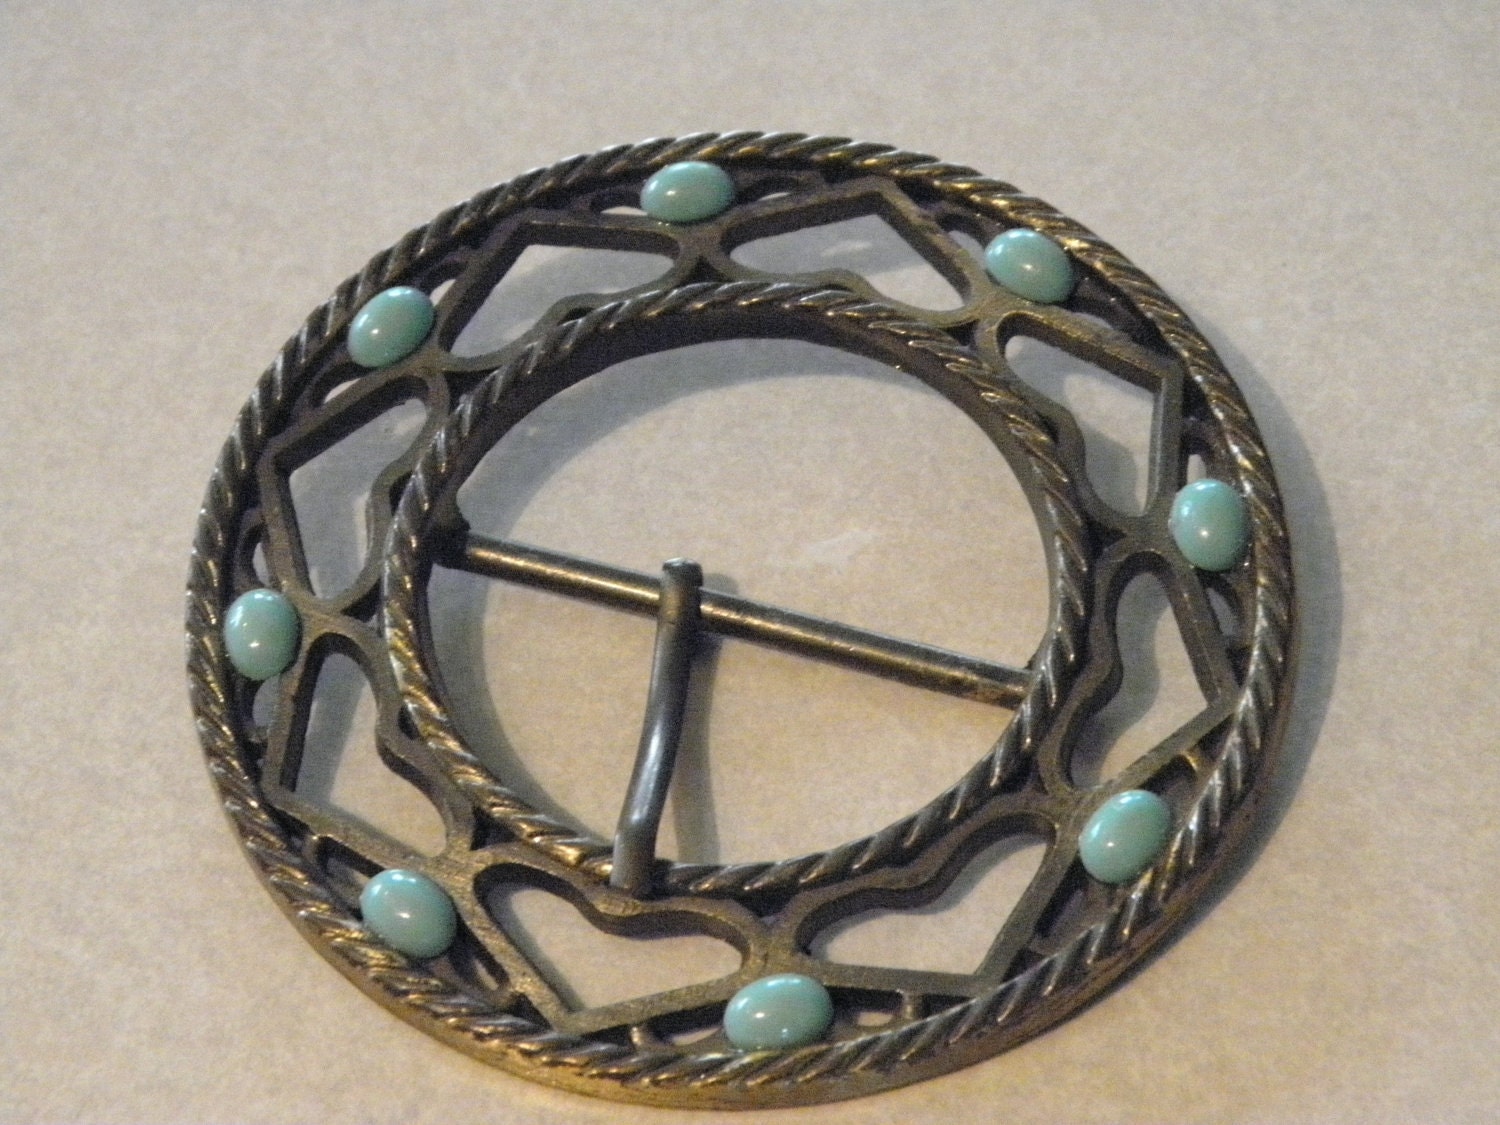 Large 70's Hippy BoHo Brass Round Belt Buckle with Hearts and Turquoise - calessabay